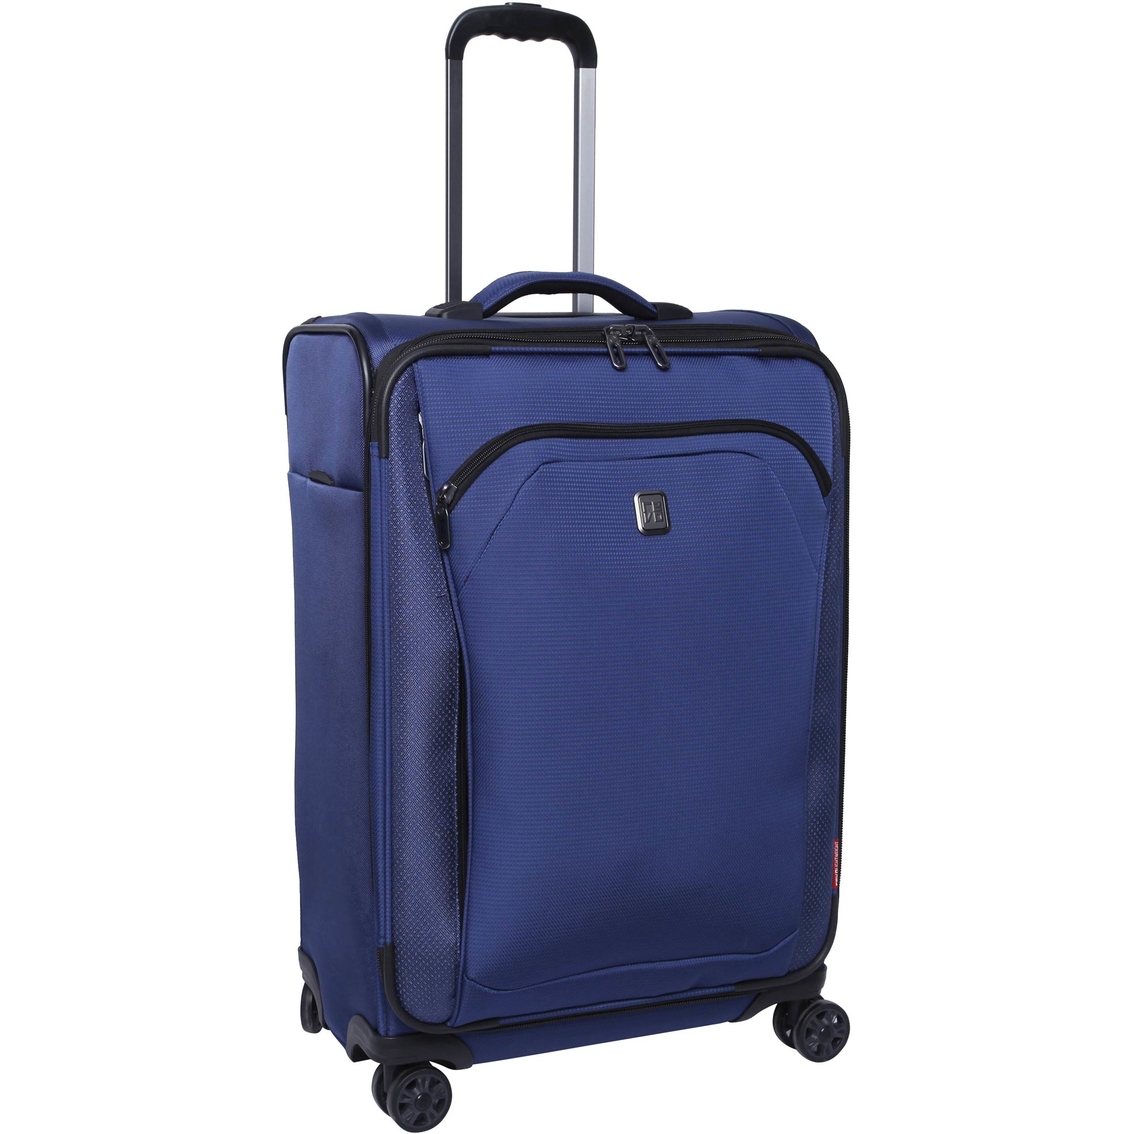 Revo Maxx Expandable Spinner Upright | Luggage | Clothing & Accessories ...